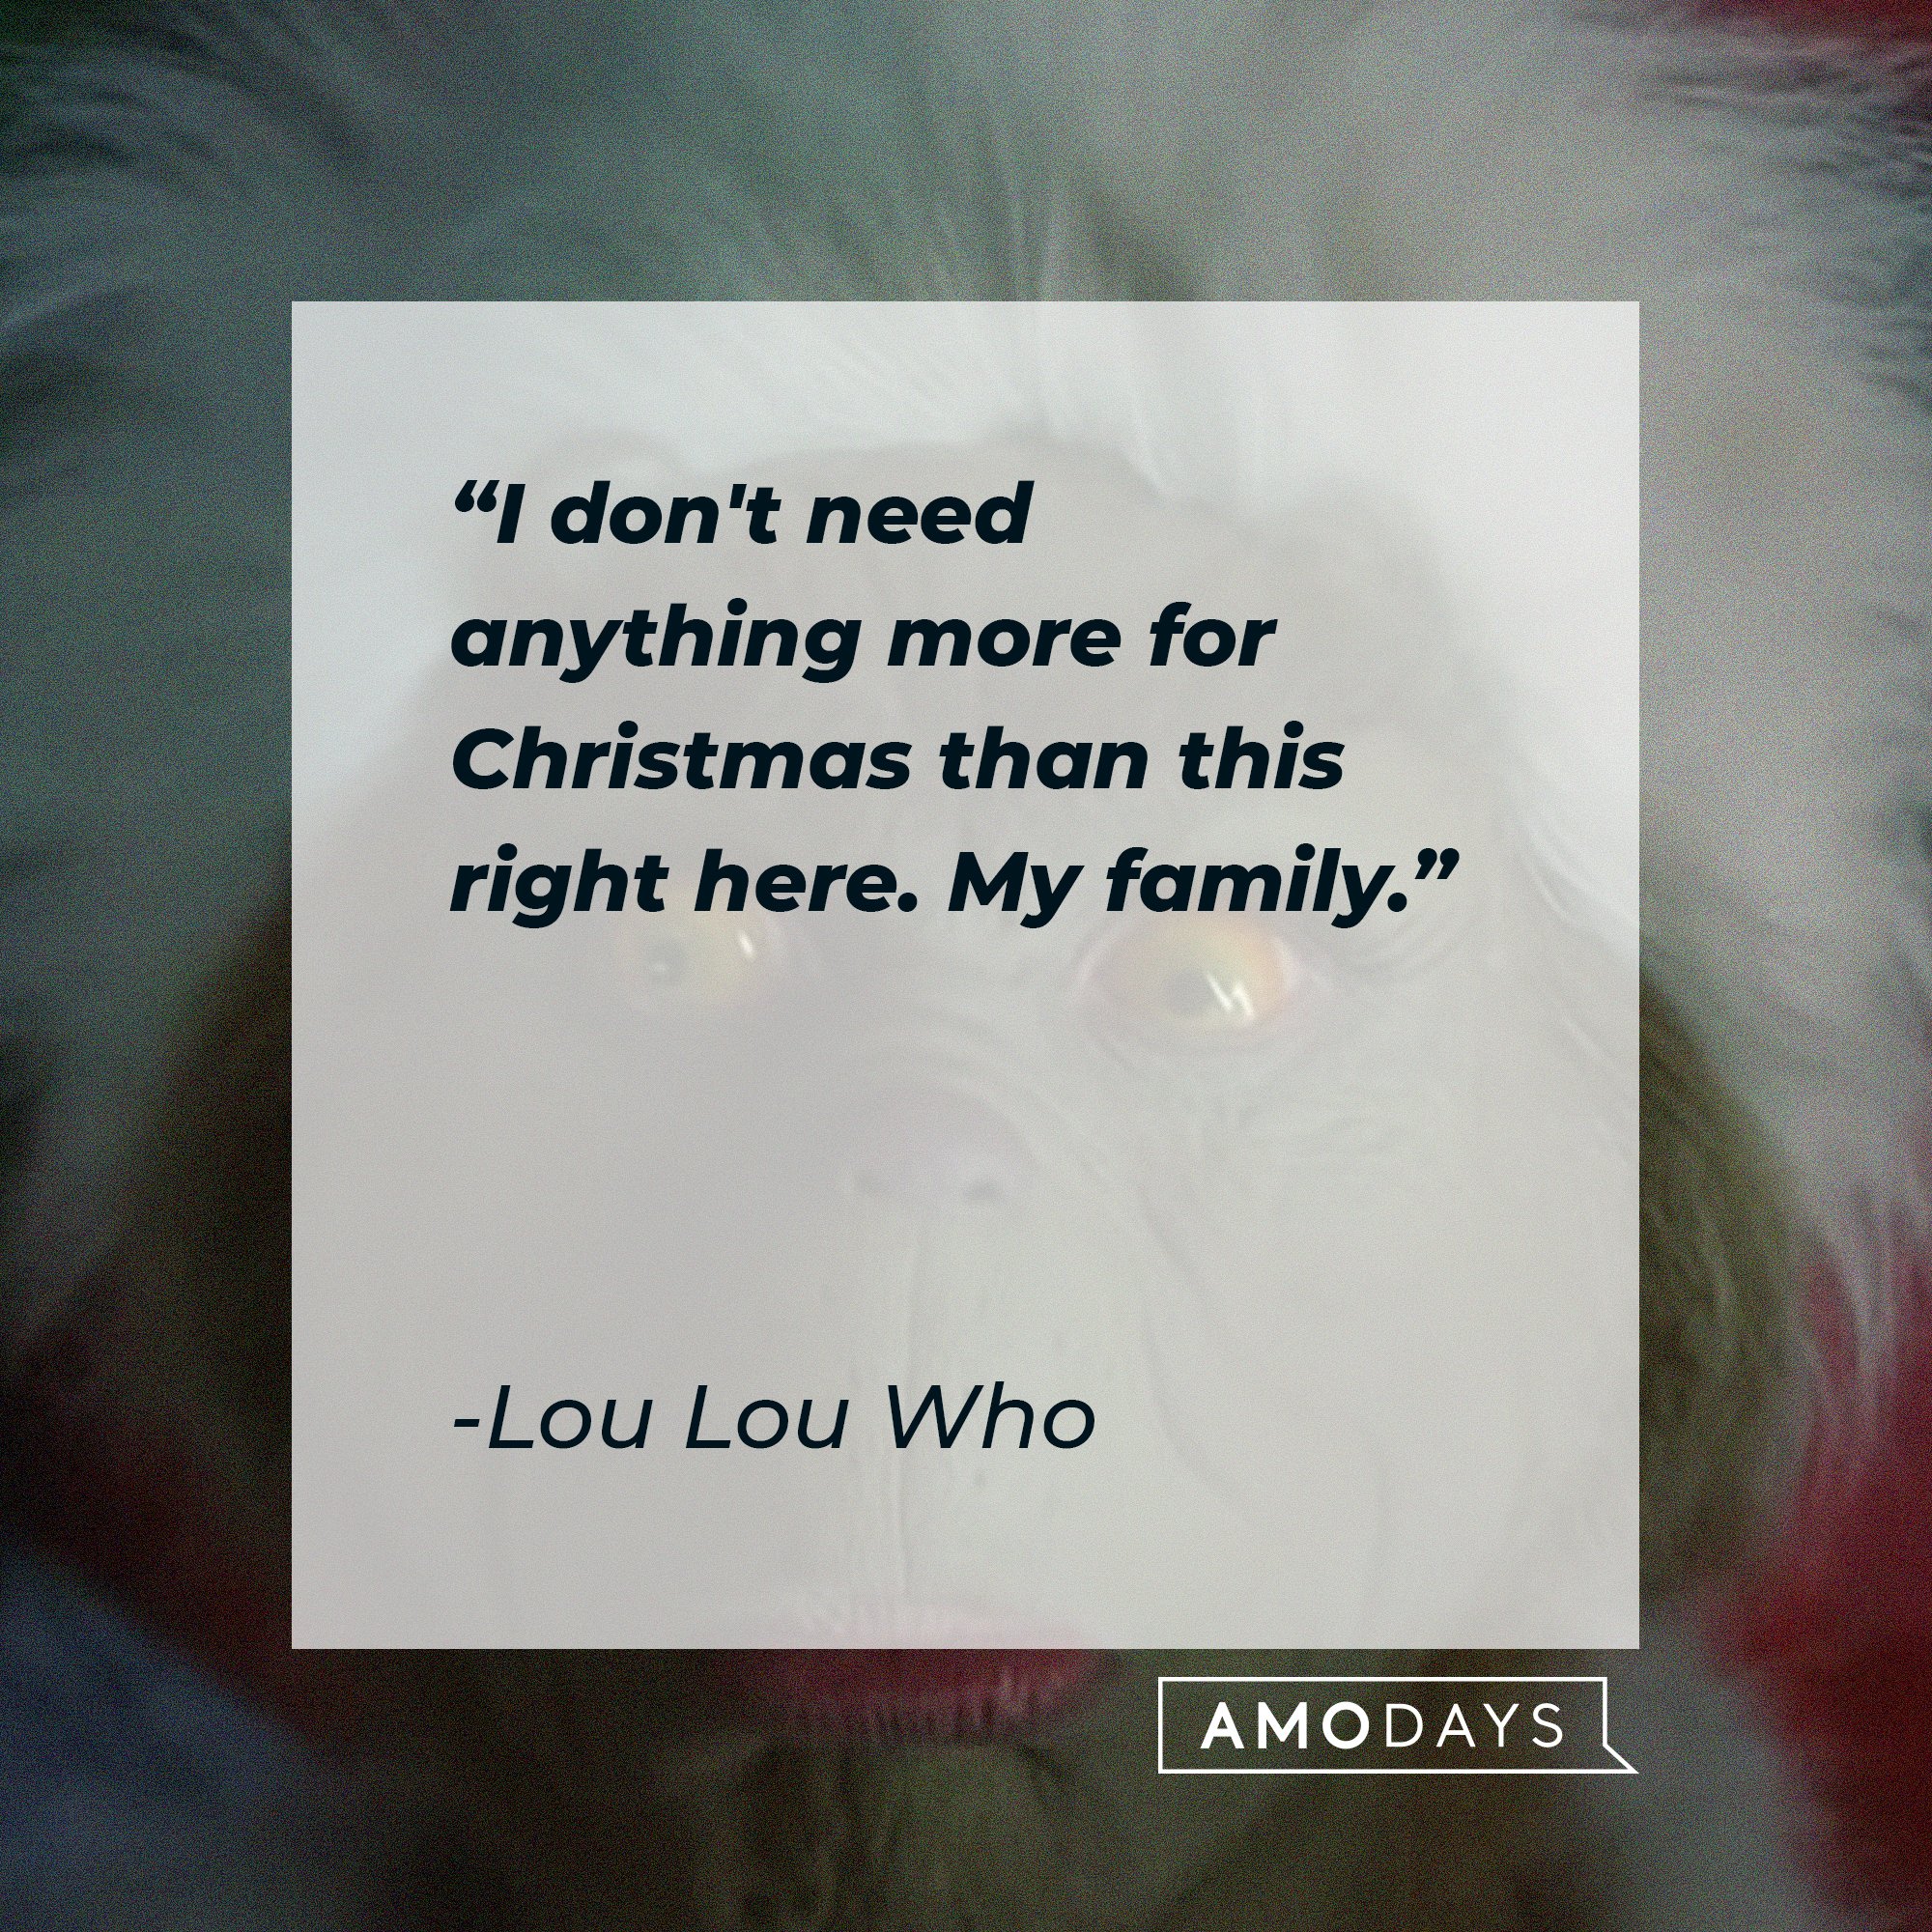 Lou Lou Who’s quote: "I don't need anything more for Christmas than this right here. My family." | Image: AmoDays